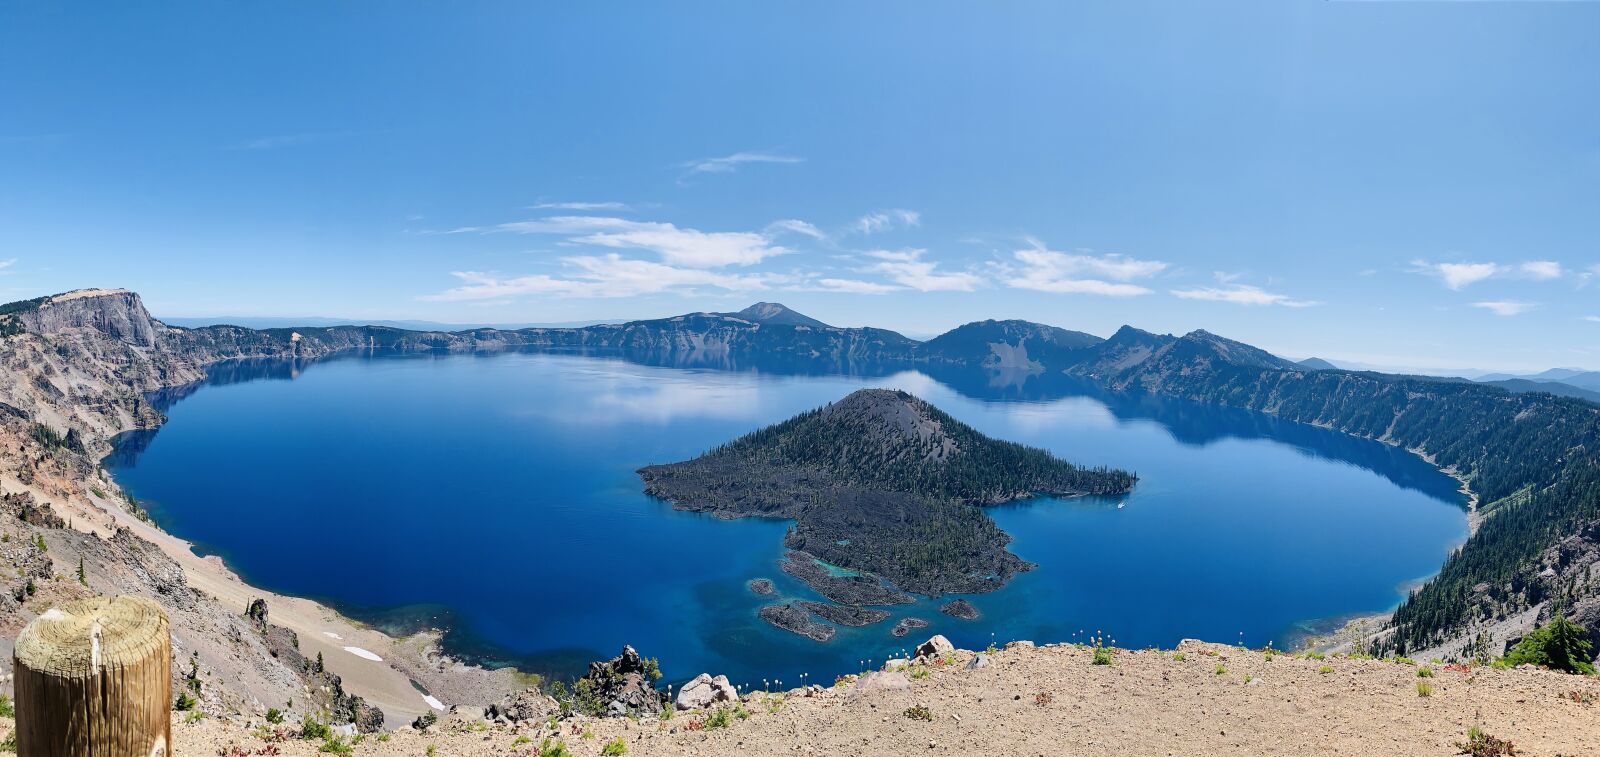 iPhone XS back camera 4.25mm f/1.8 sample photo. Crater lake national park photography